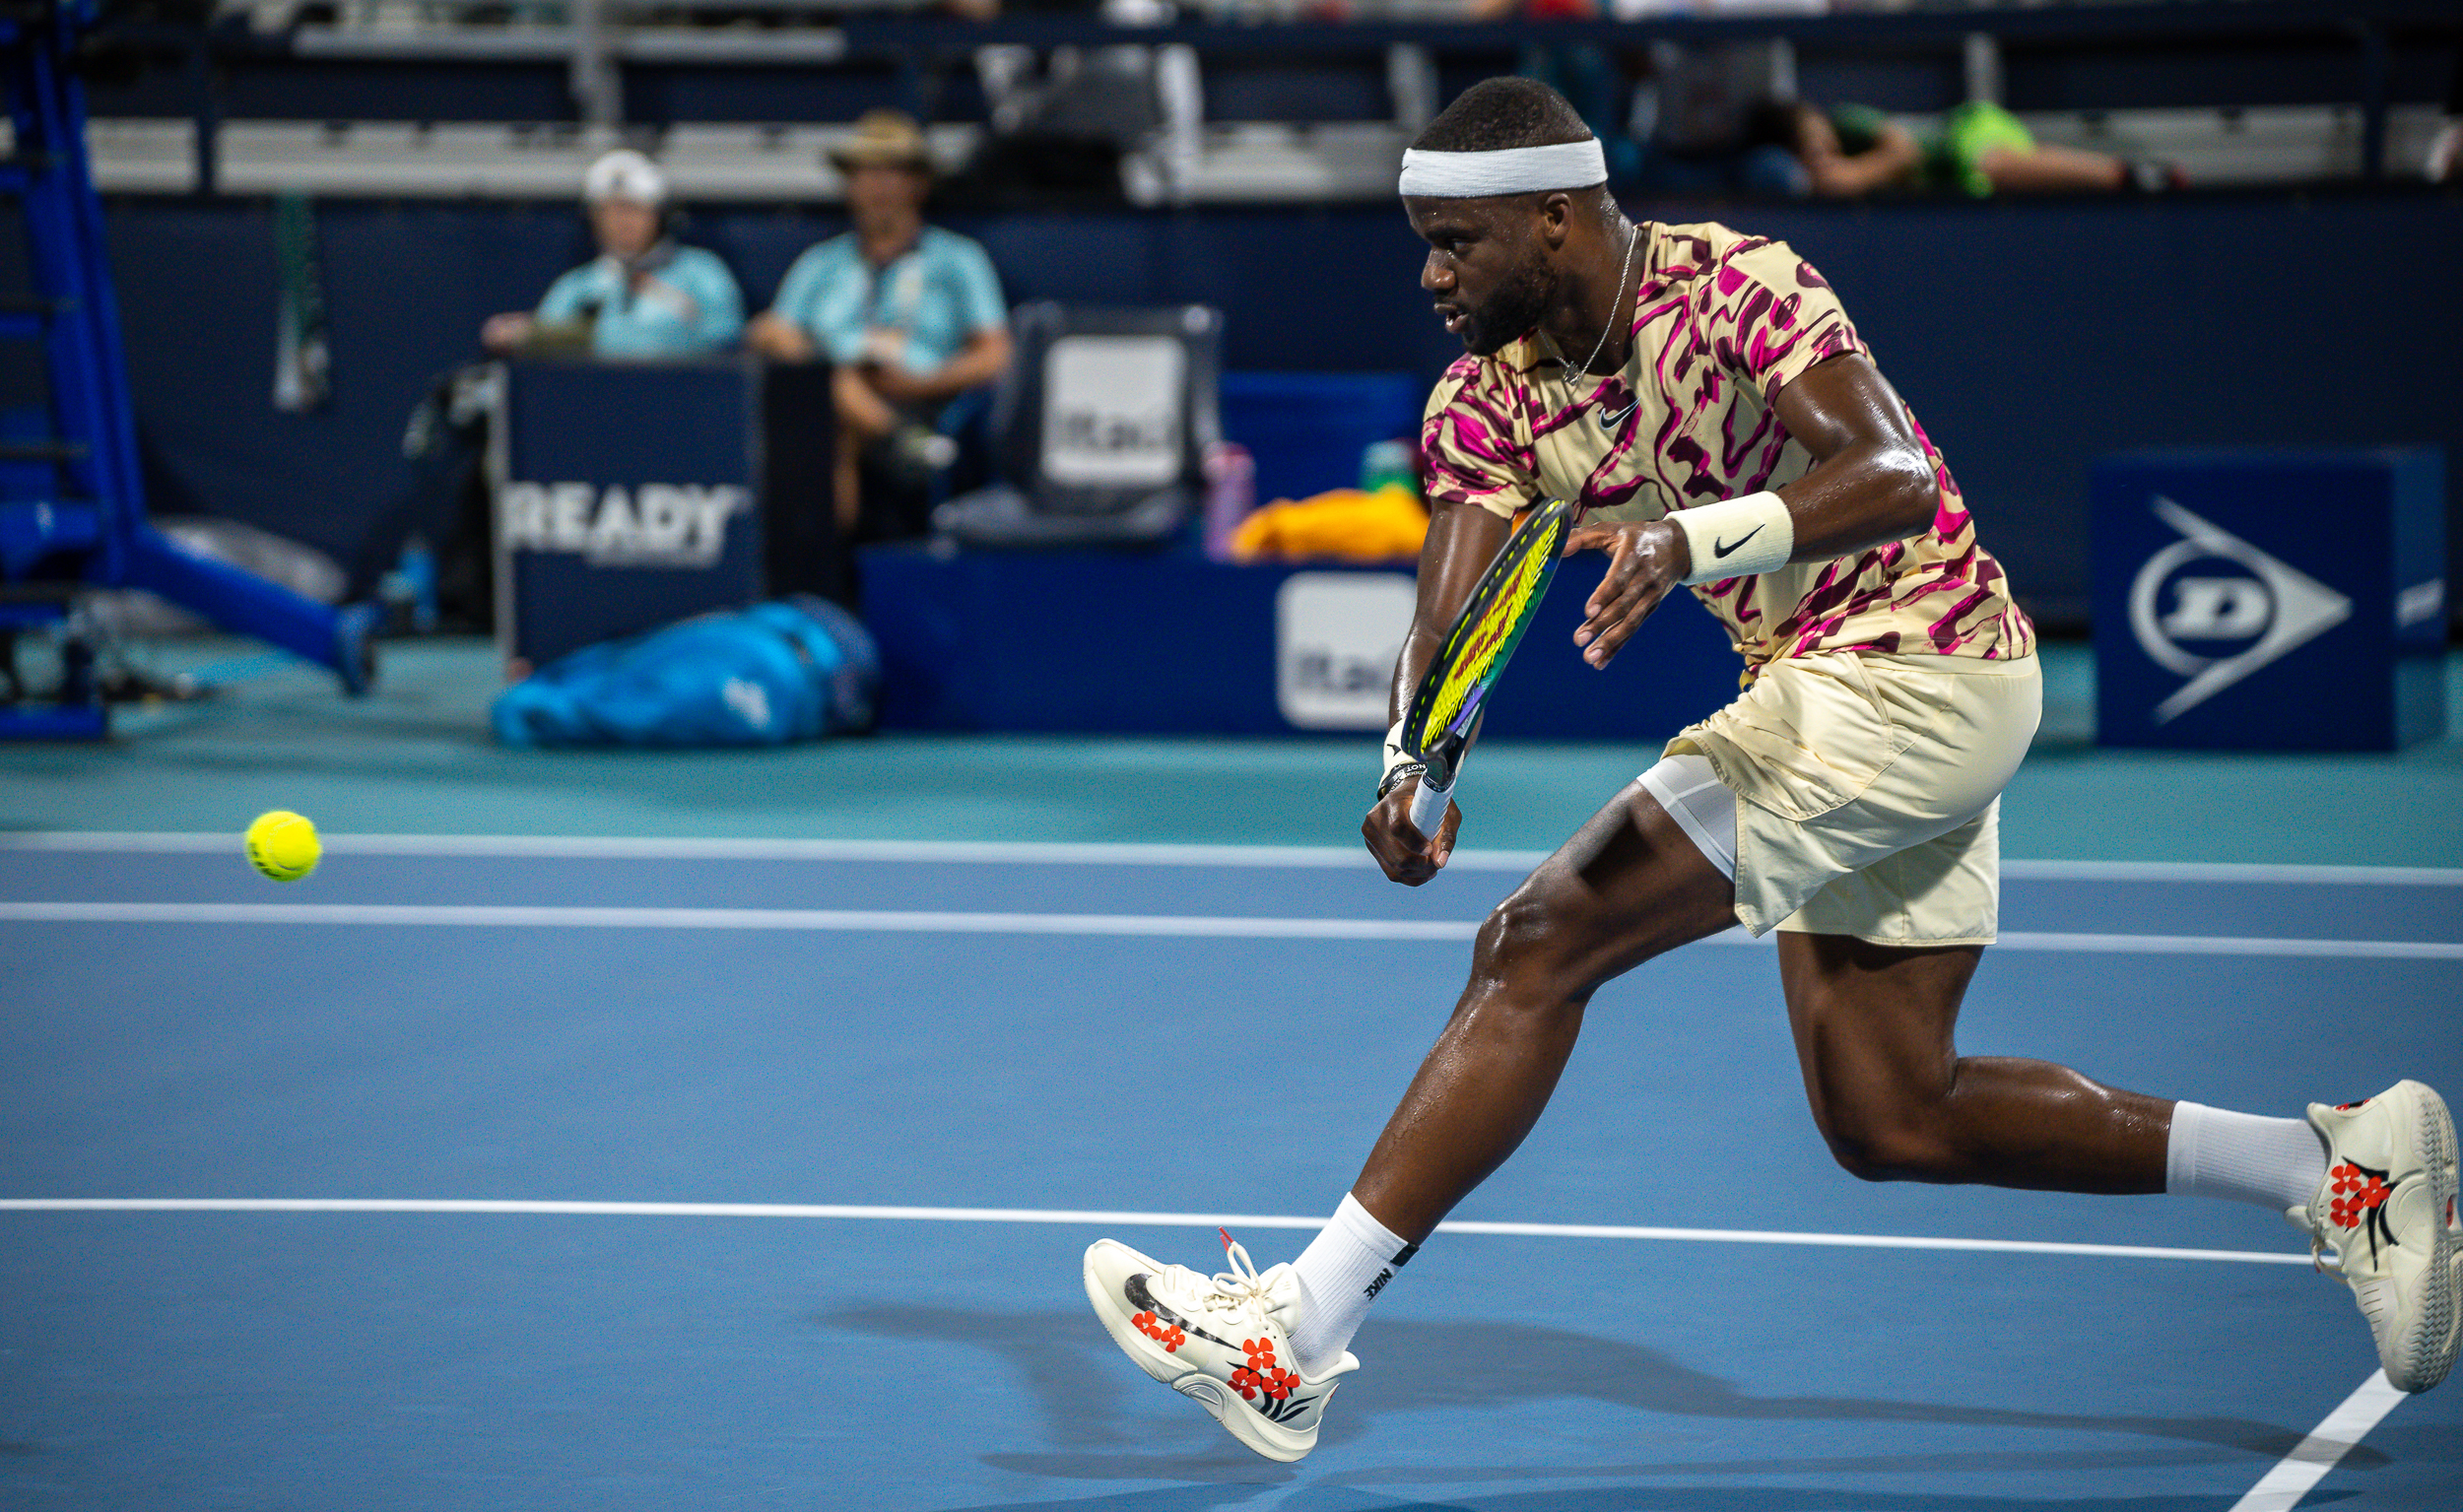 Frances Tiafoe leans in to slice a backhand during his match against Yosuke Watanuke on March 25 at the 2023 Miami Open.